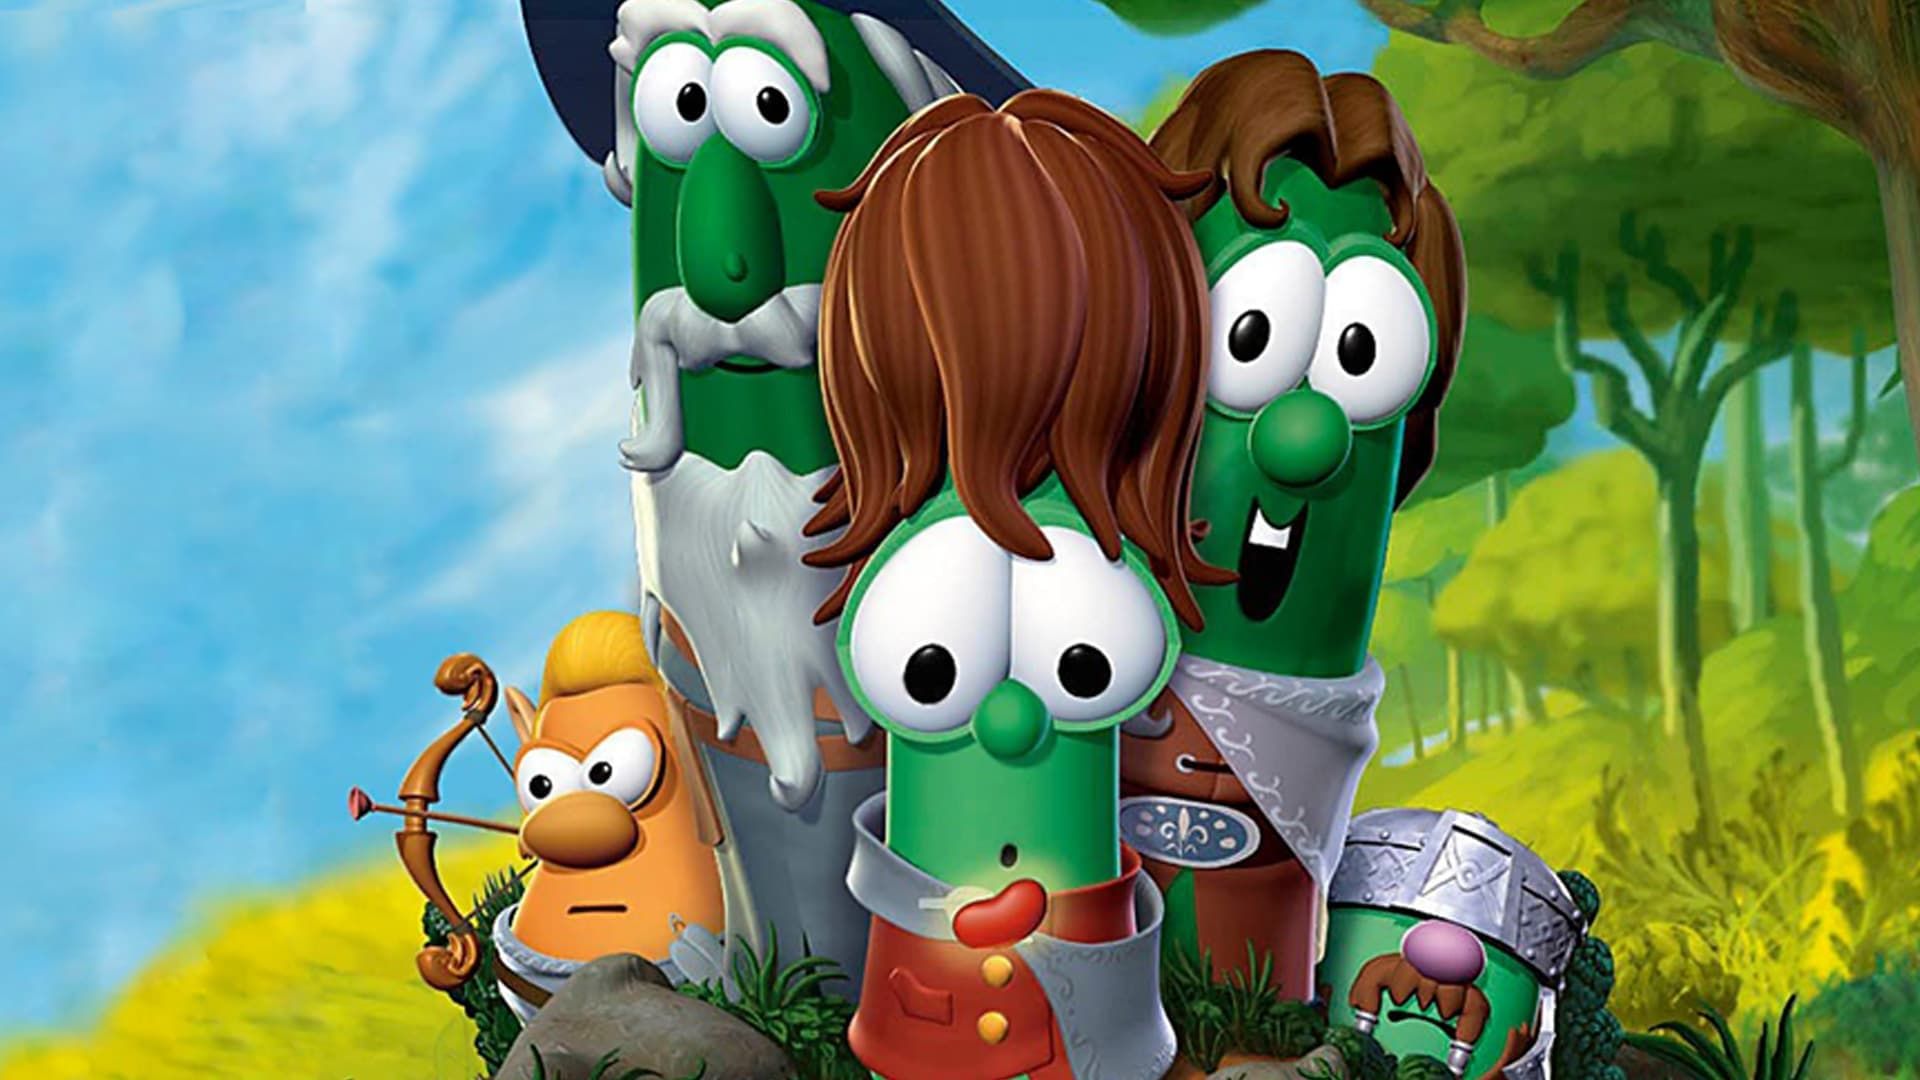 VeggieTales: Lord of the Beans background